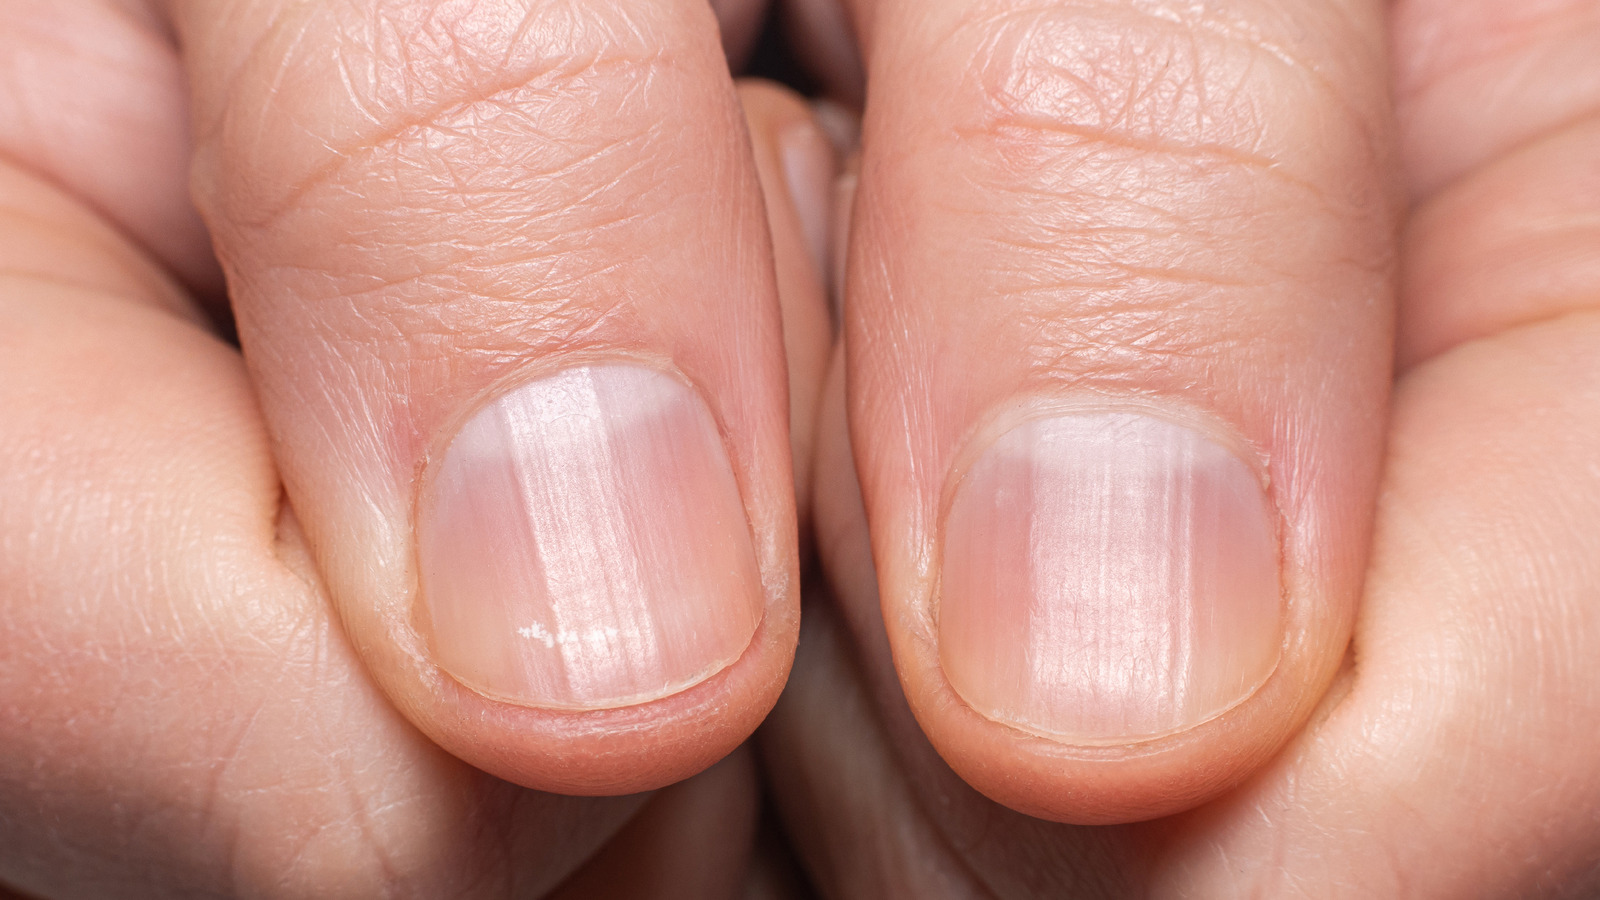 What can you do about yellow nails? | Ohio State Medical Center